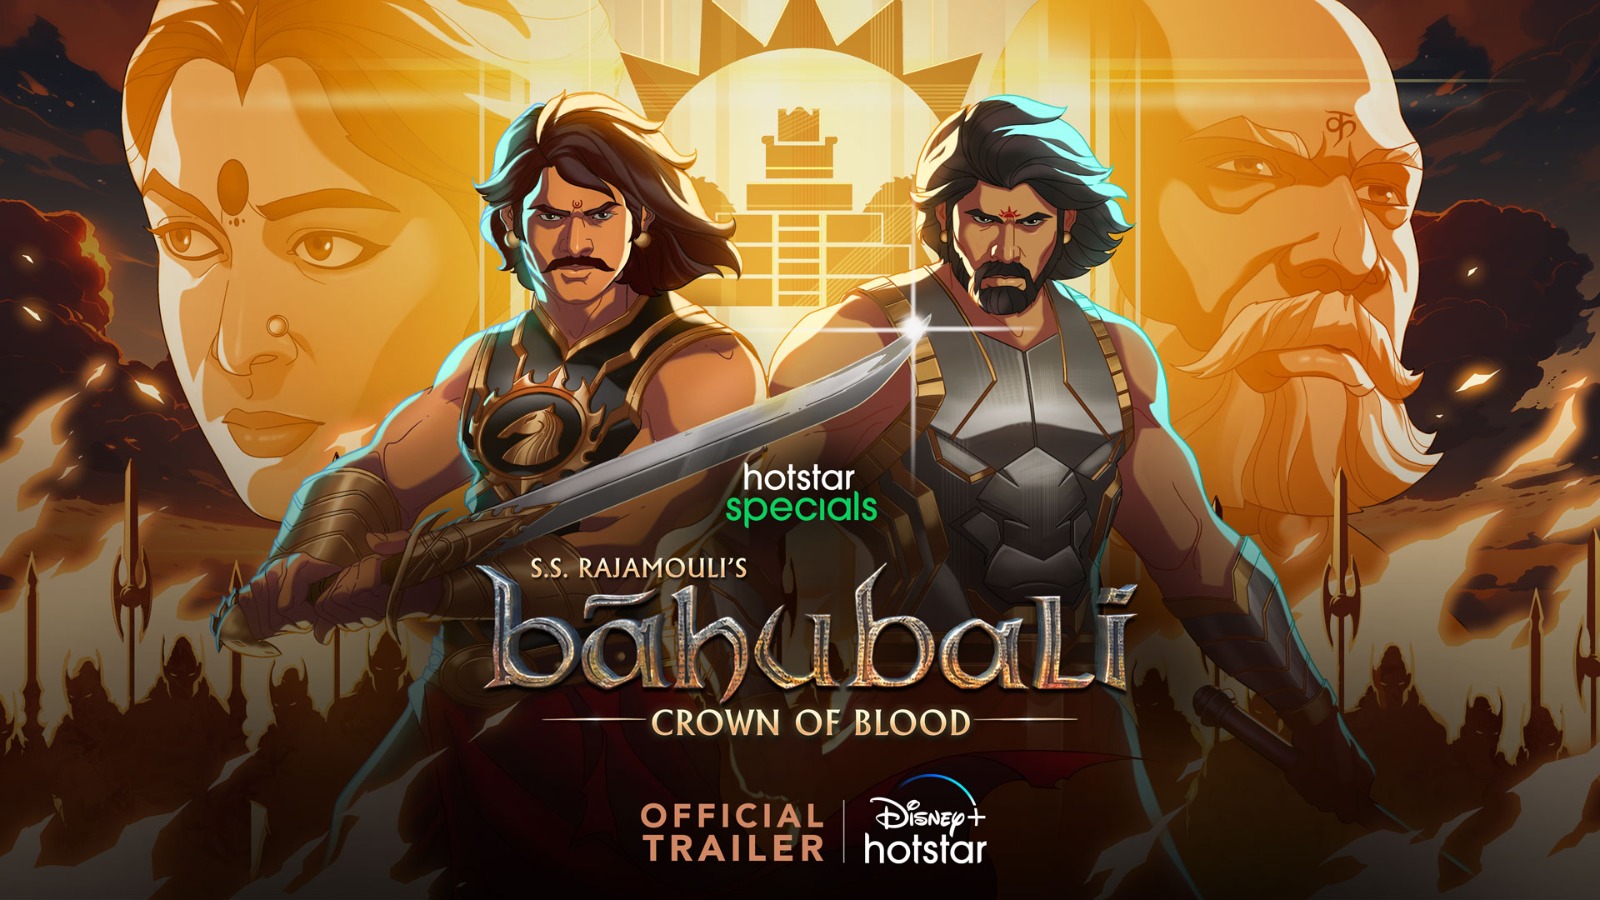 Disney+ Hotstar brings the team of Baahubali: Crown of Blood together in the heartland of the Baahubali franchise